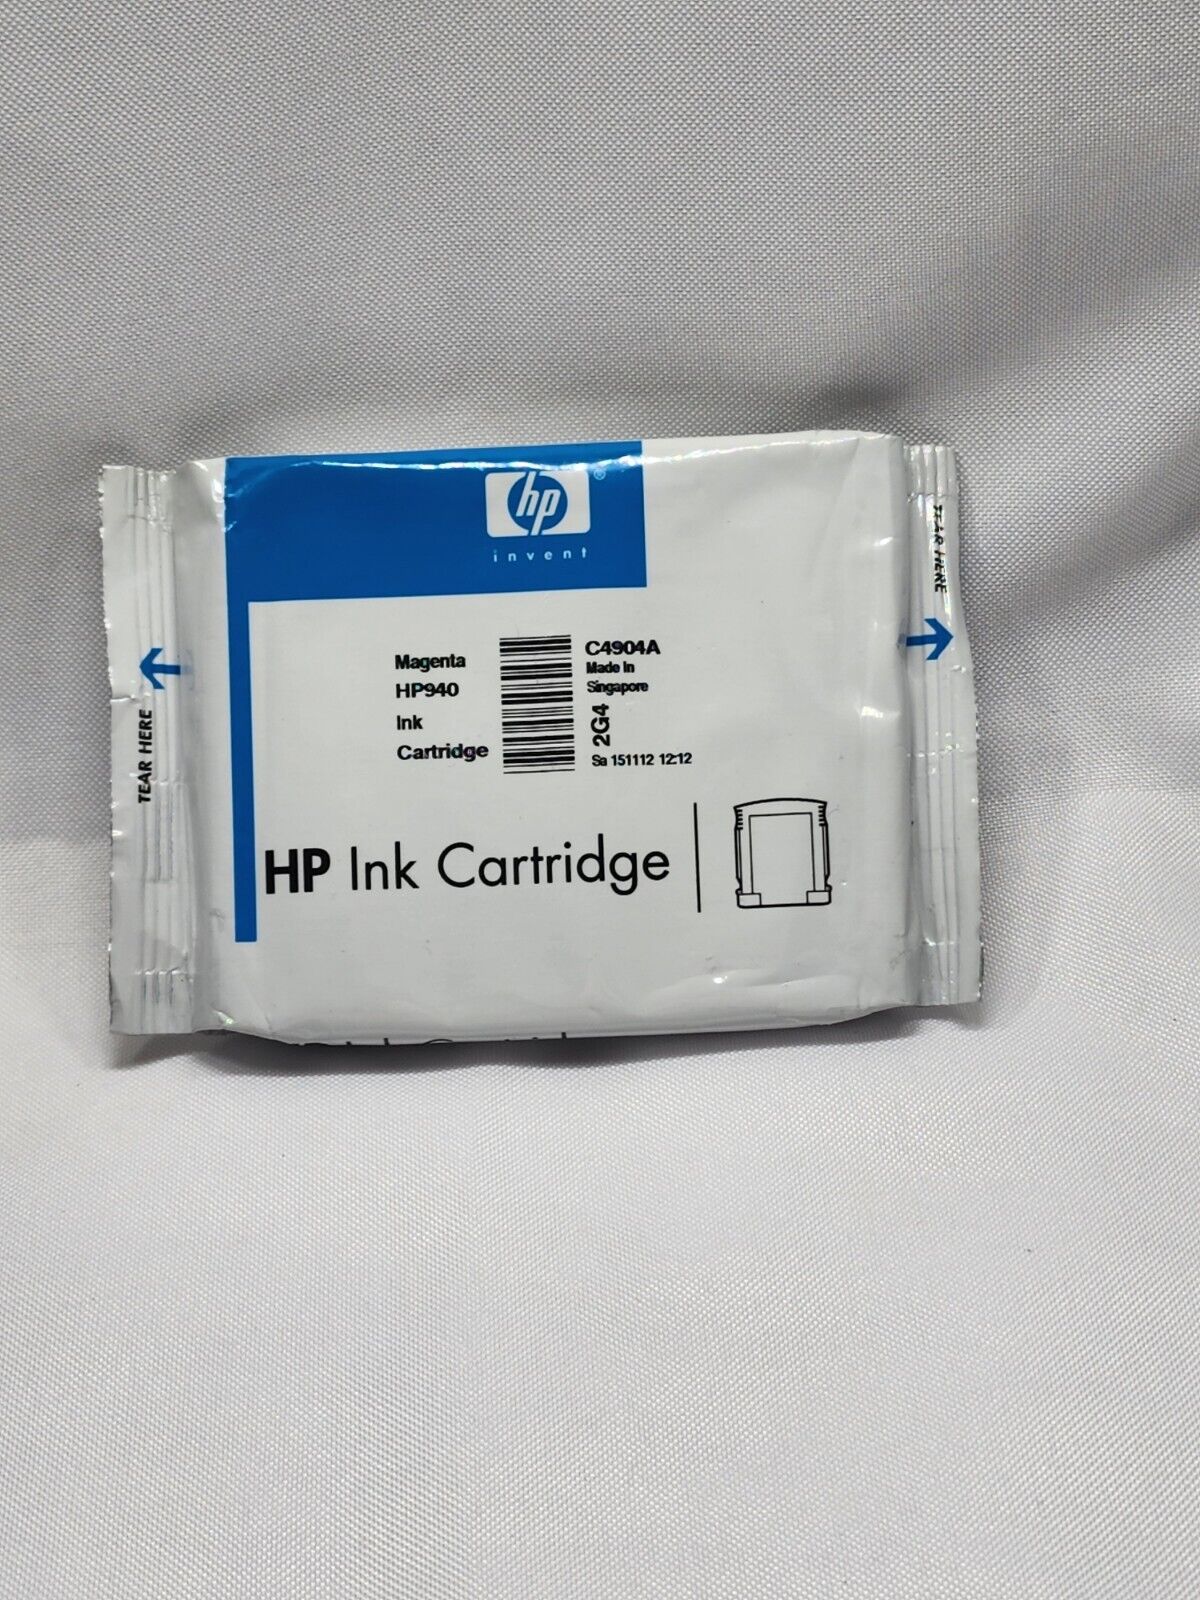 HP 940 Magenta C4904A Officejet Pro Ink Cartridge SEALED FREE FAST SHIPPING